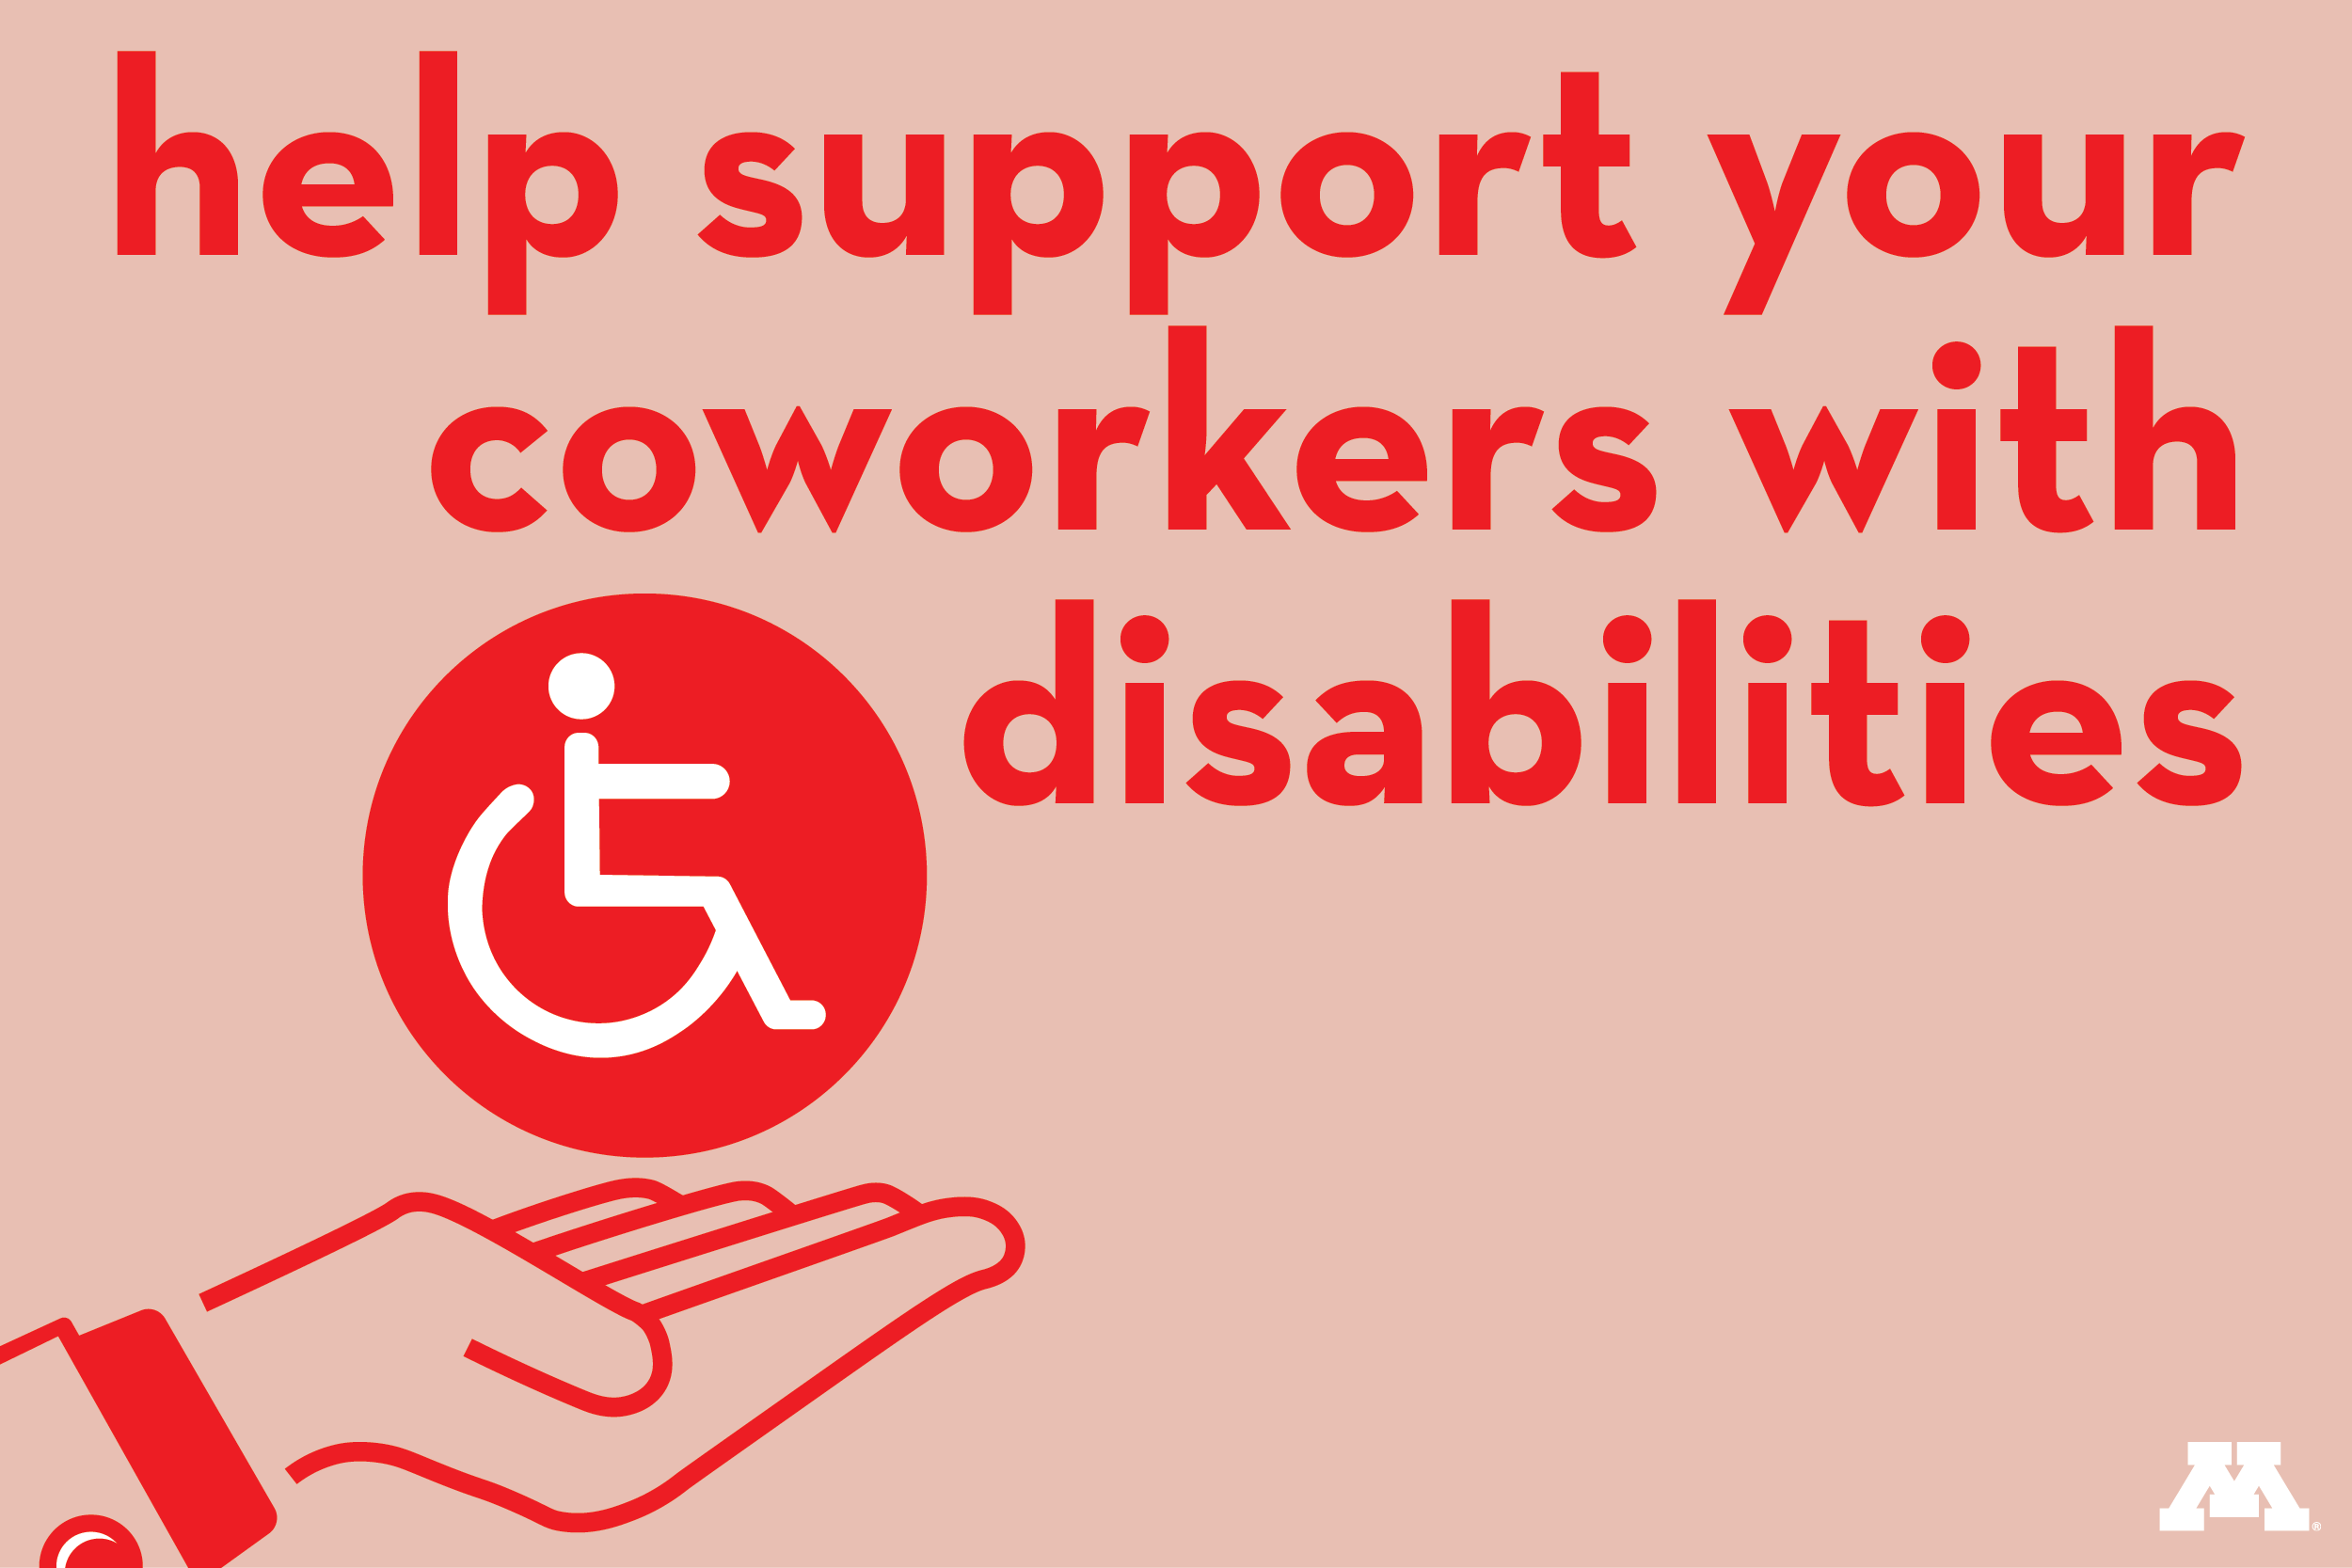 support coworkers with disabilities